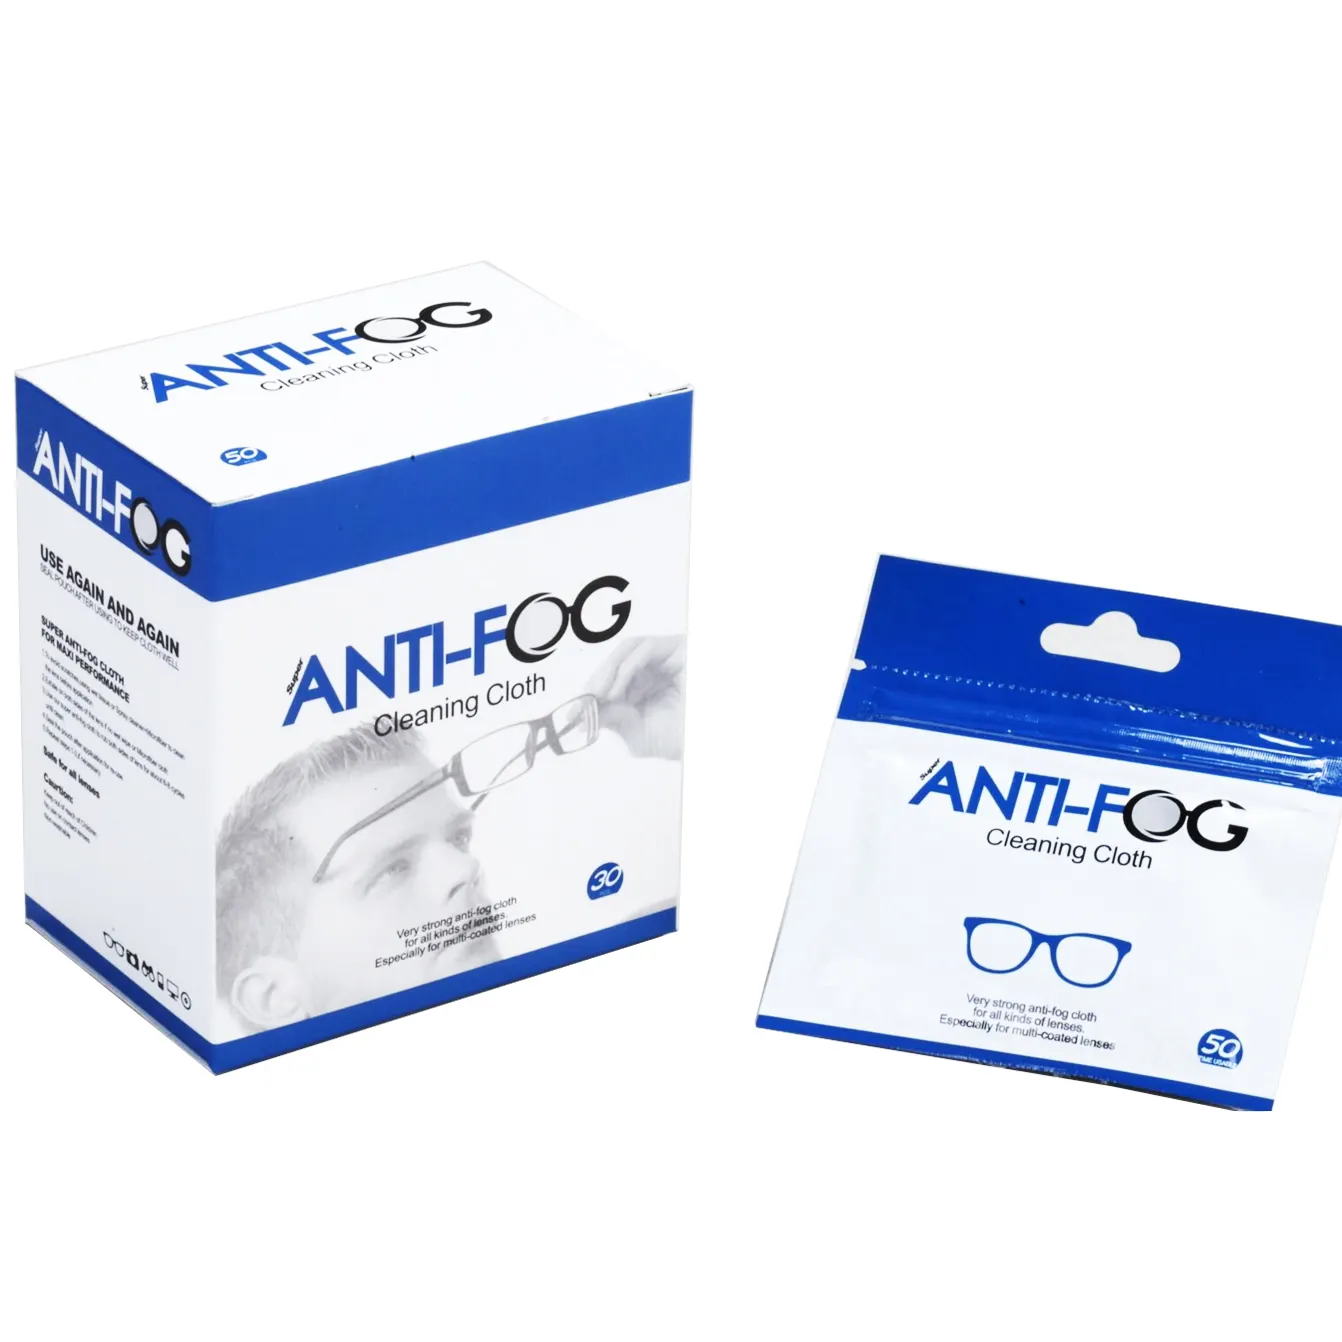 Superior Quality Anti Fog Microfbier Cleaning Cloth For Glasses